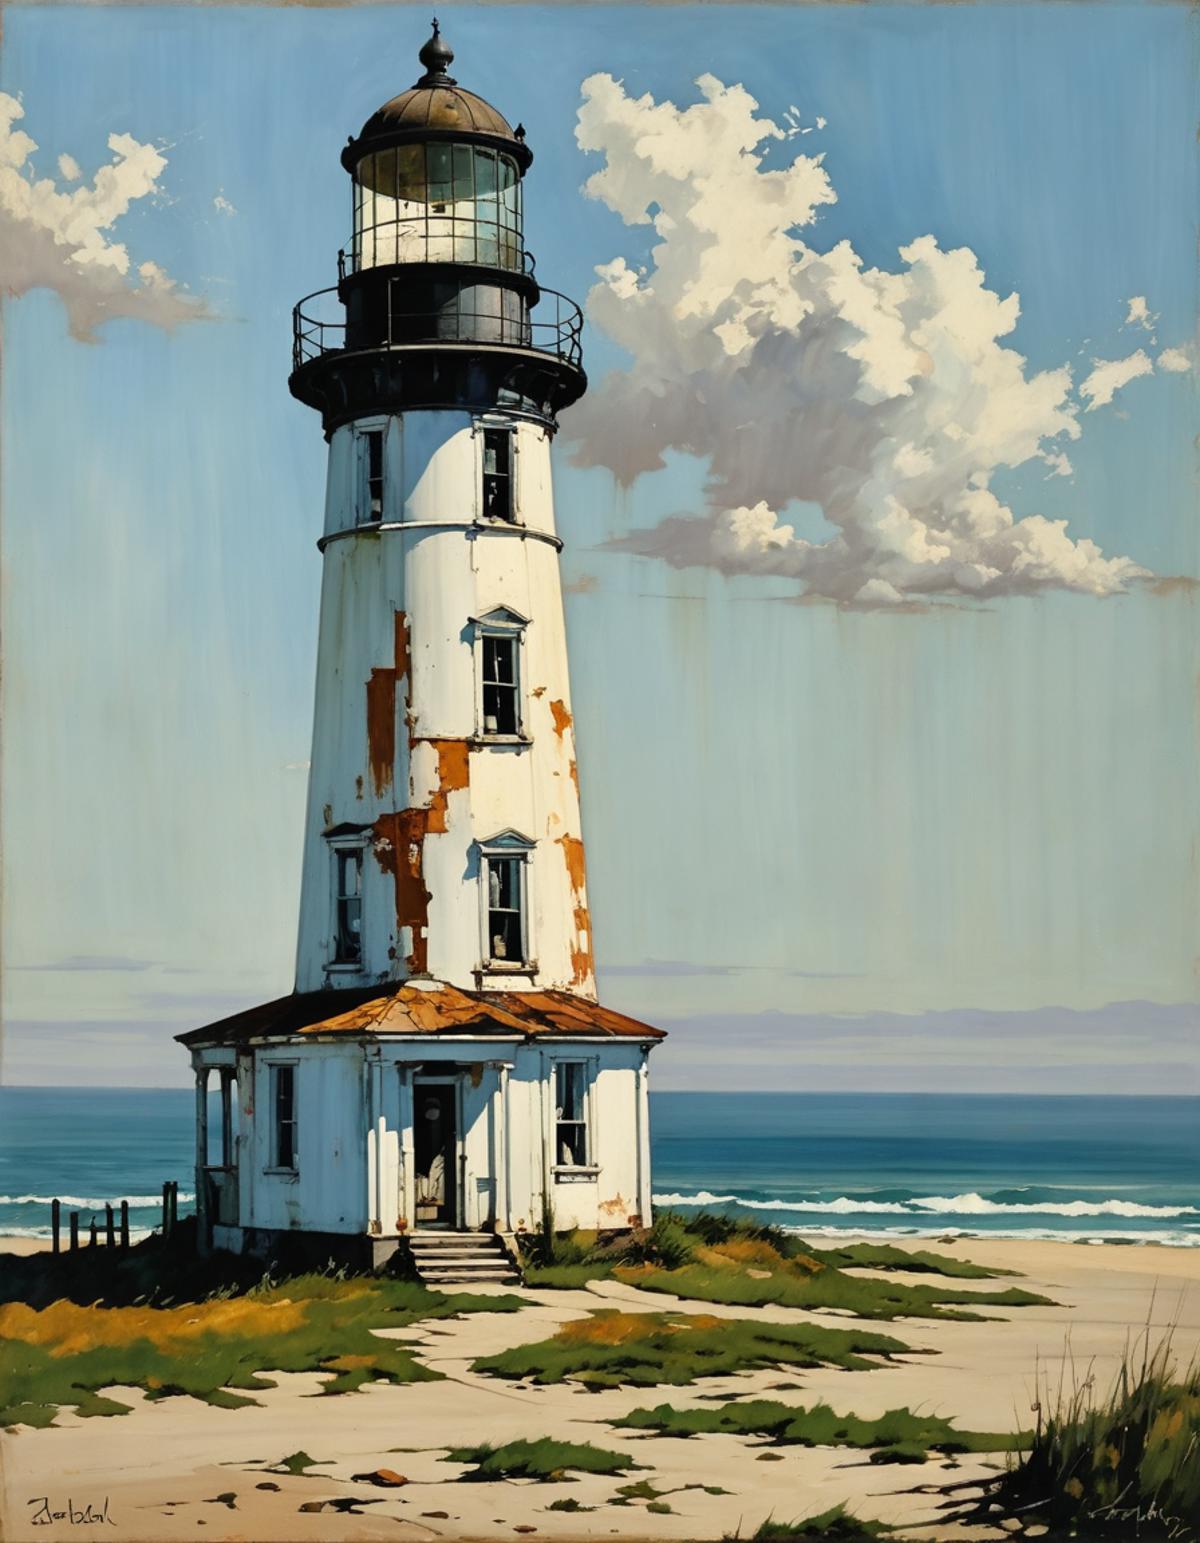 A painting of a lighthouse with a cloudy sky.